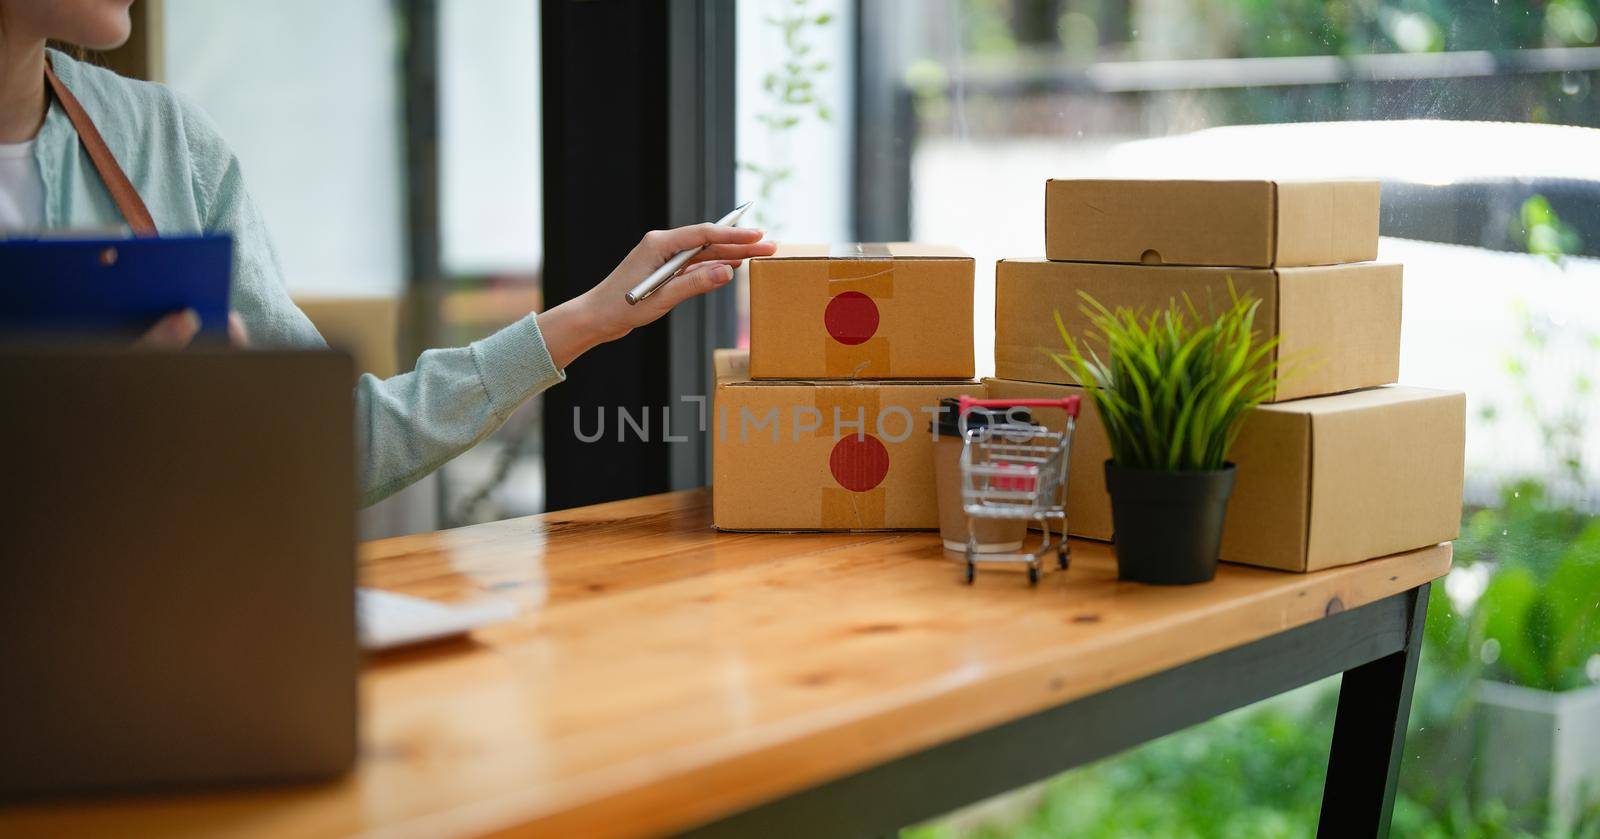 Startup small business SME, Entrepreneur owner using smartphone or tablet taking receive and checking online purchase shopping order to preparing pack product box. Selling online ideas concept.